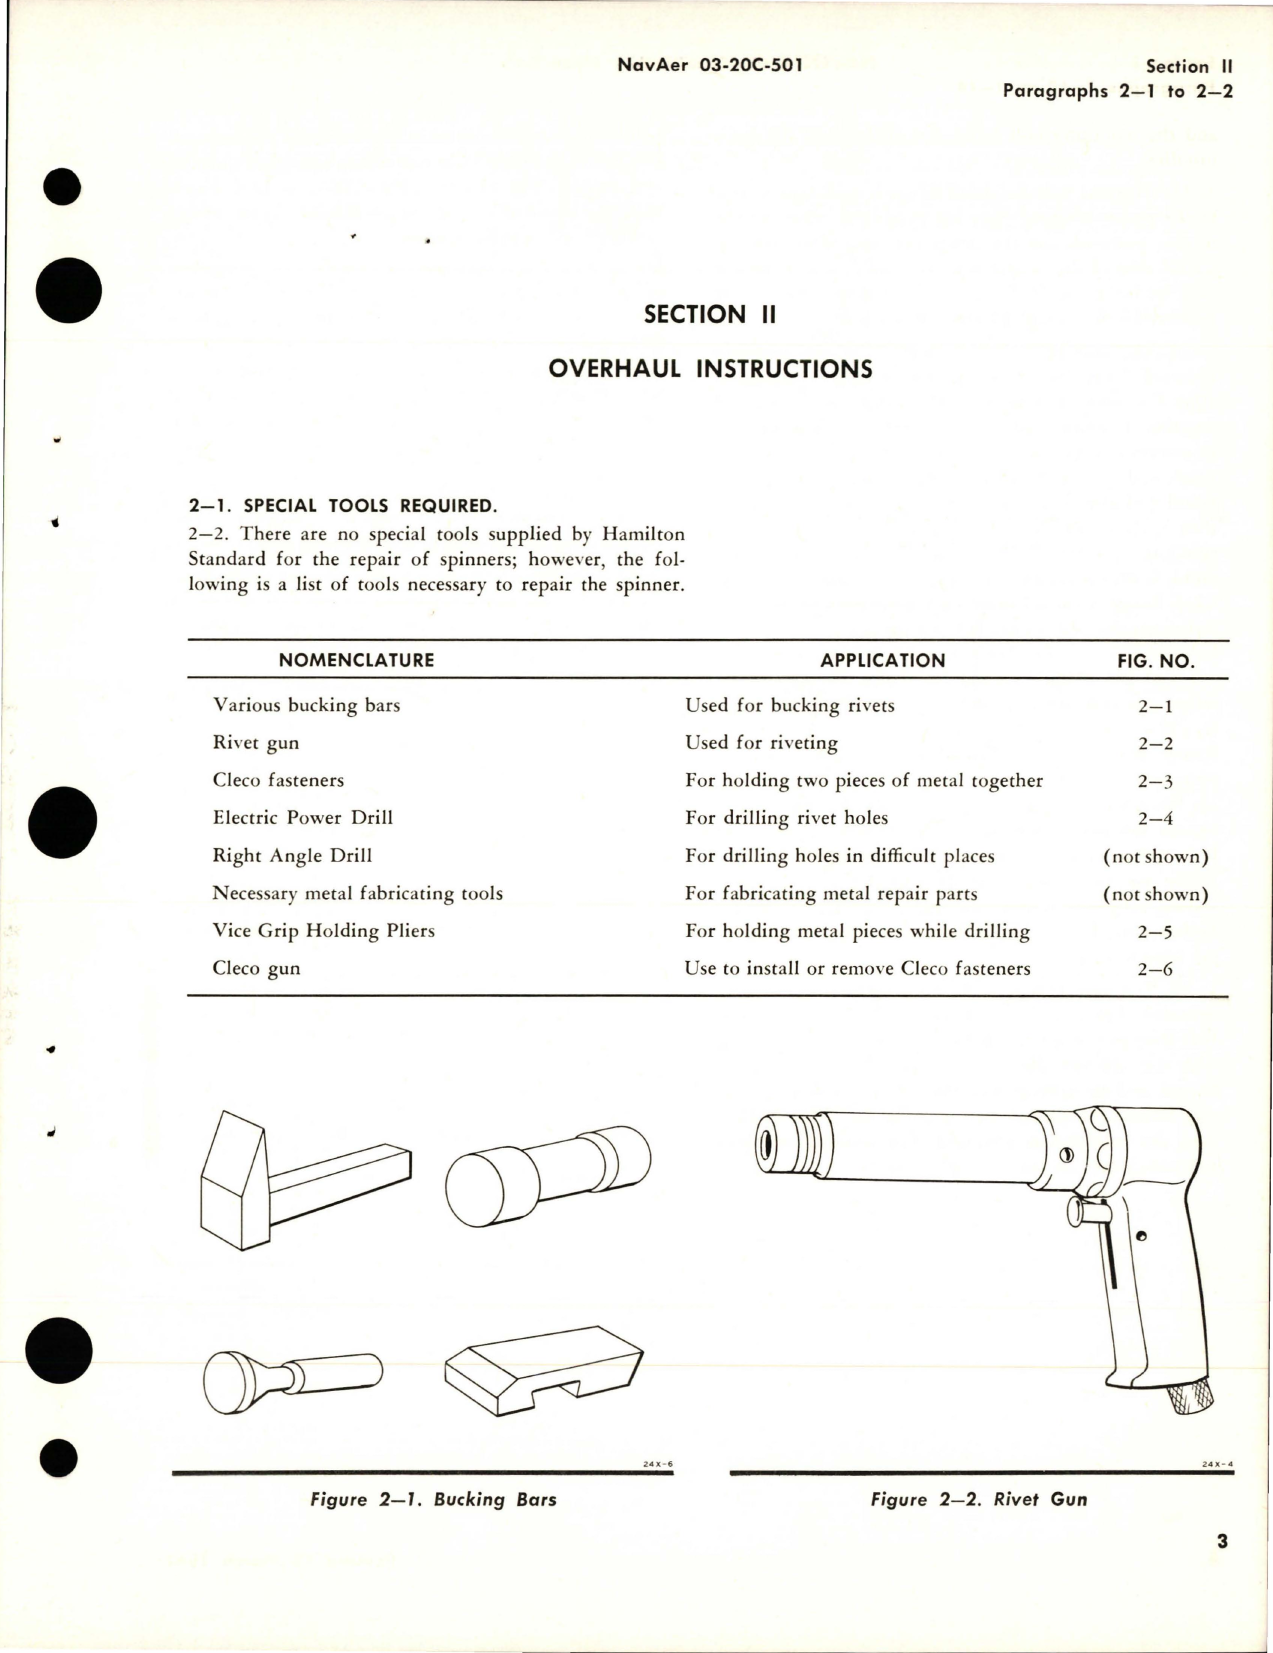 Sample page 7 from AirCorps Library document: Overhaul Instructions for Spinner Assembly